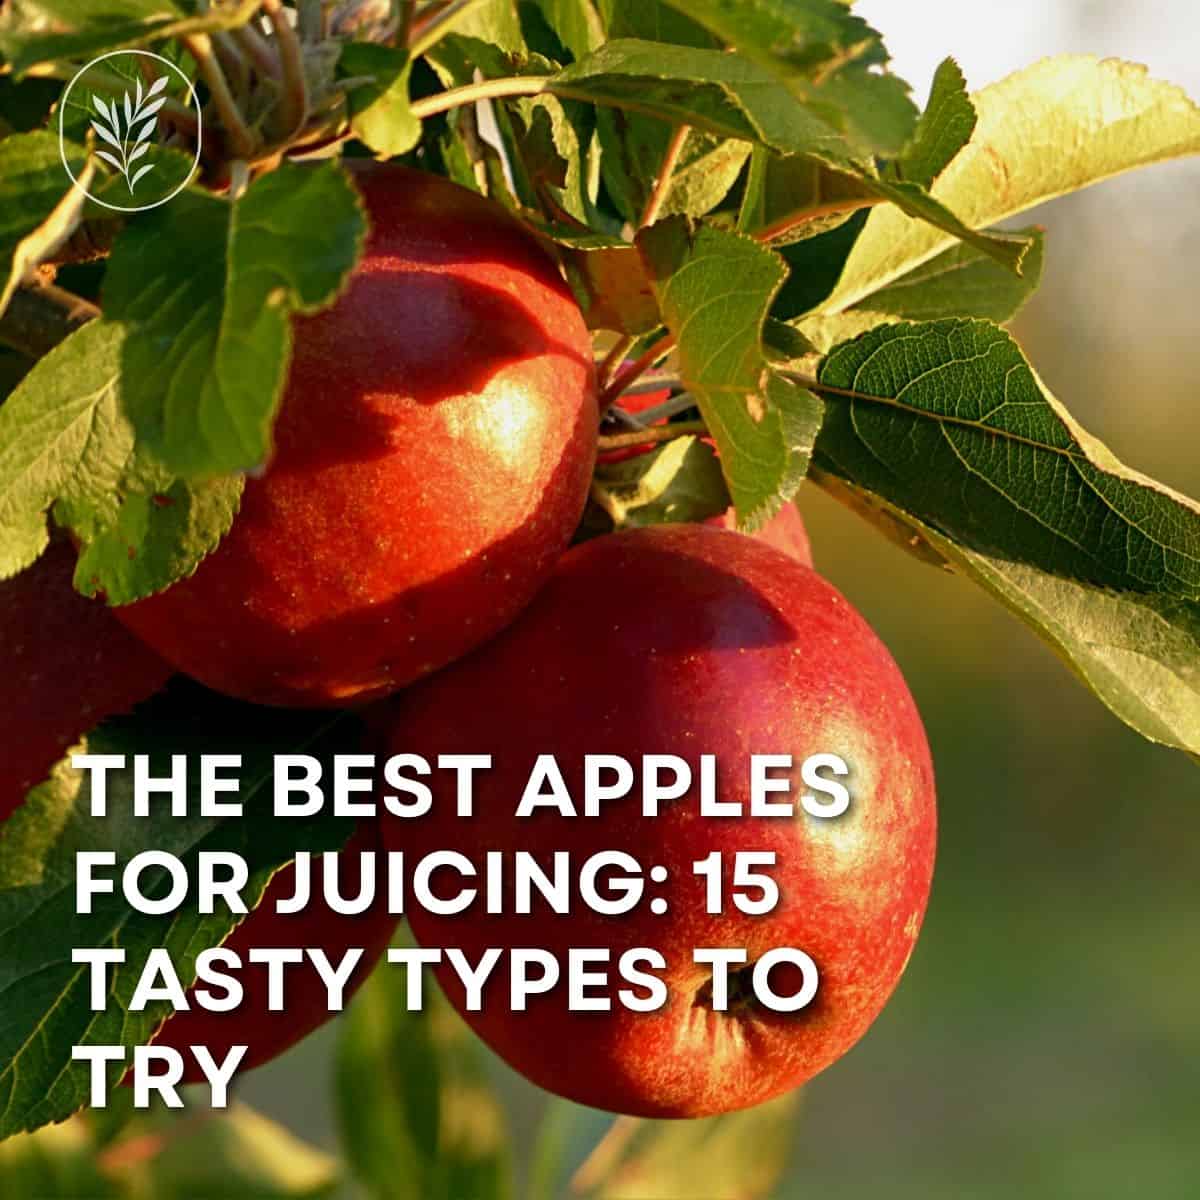 The best apples for juicing - instagram via @home4theharvest